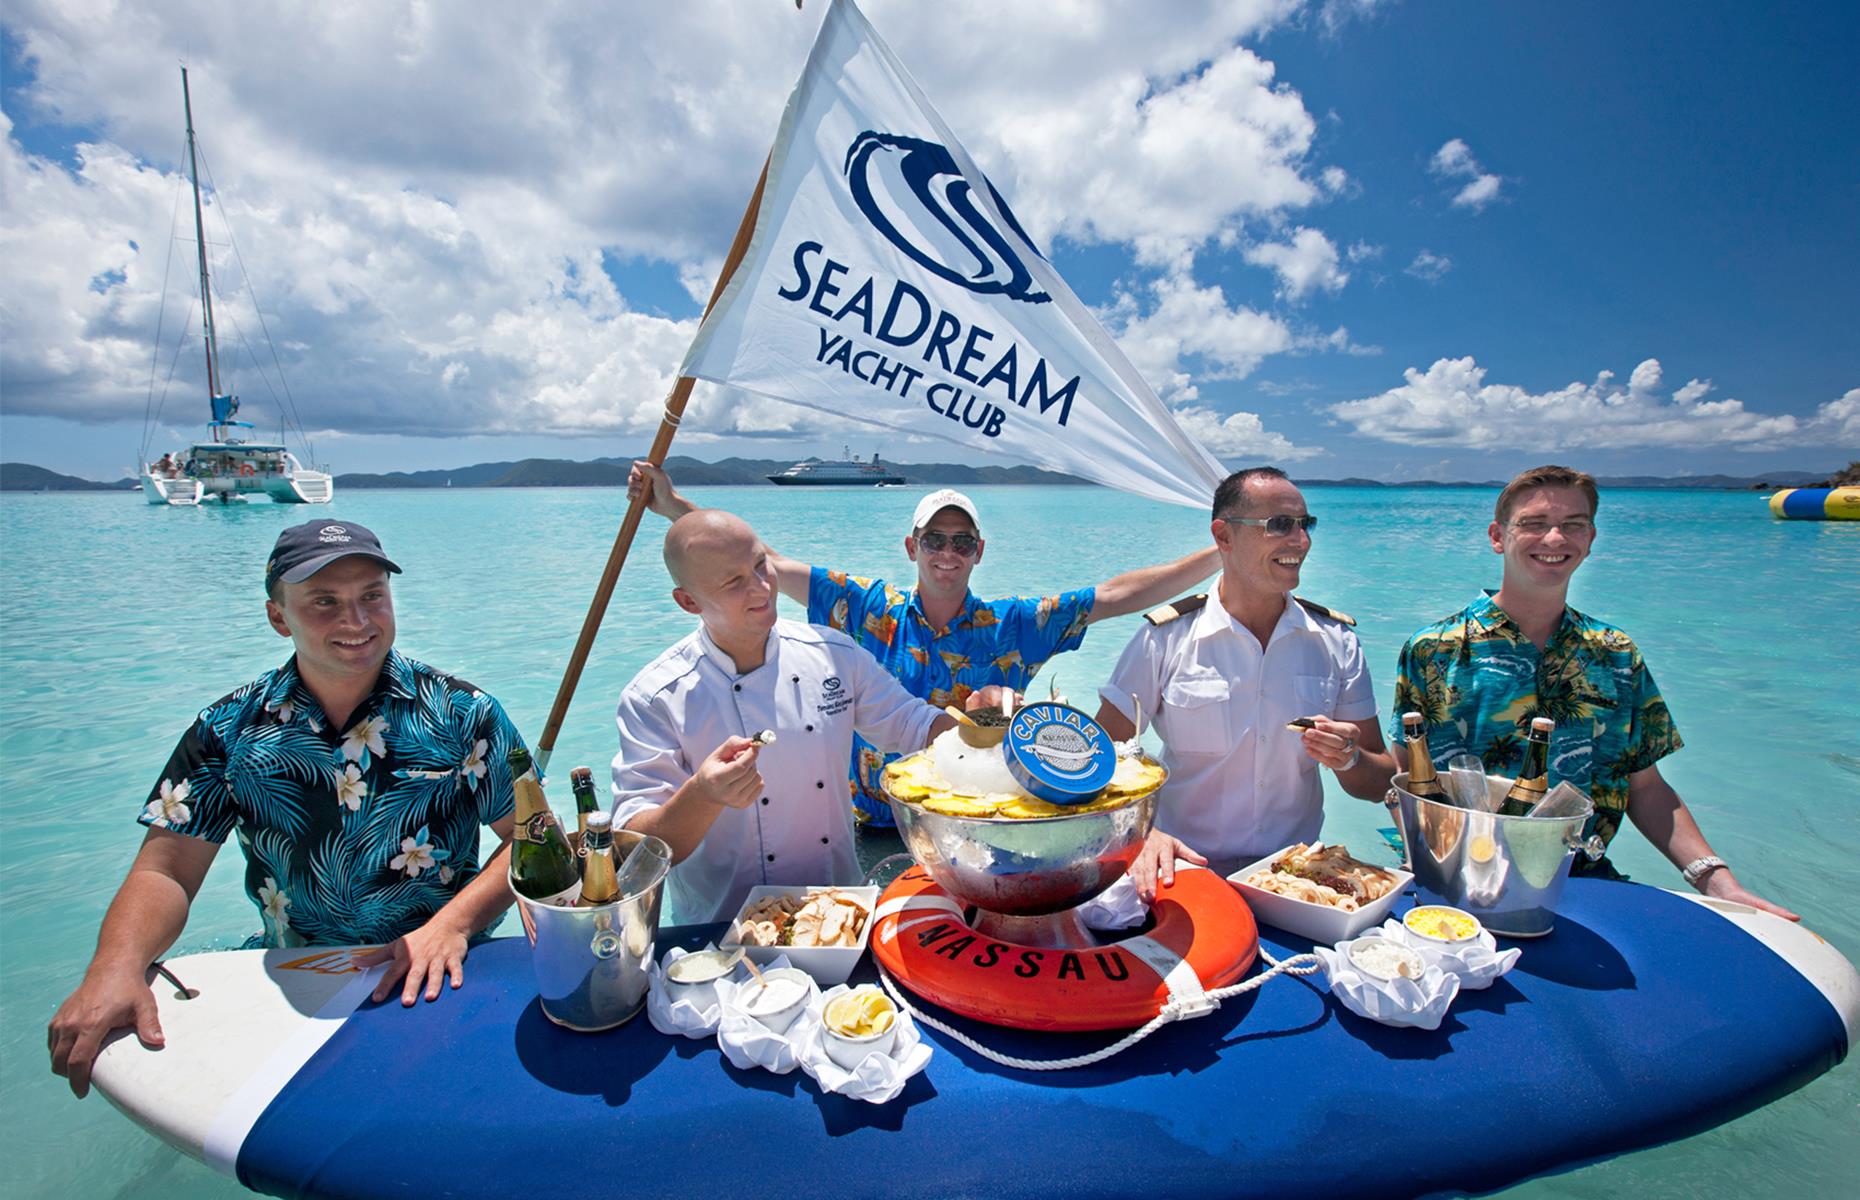 What better way to toast your voyage than with vast quantities of Champagne and caviar? For many SeaDream Yacht Club guests, the highlight of every Caribbean sailing is the Champagne & Caviar Splash, when a gourmet barbecue – which mainly consists of unlimited quantities of Champagne and caviar – is served on the nearest sandy white beach.